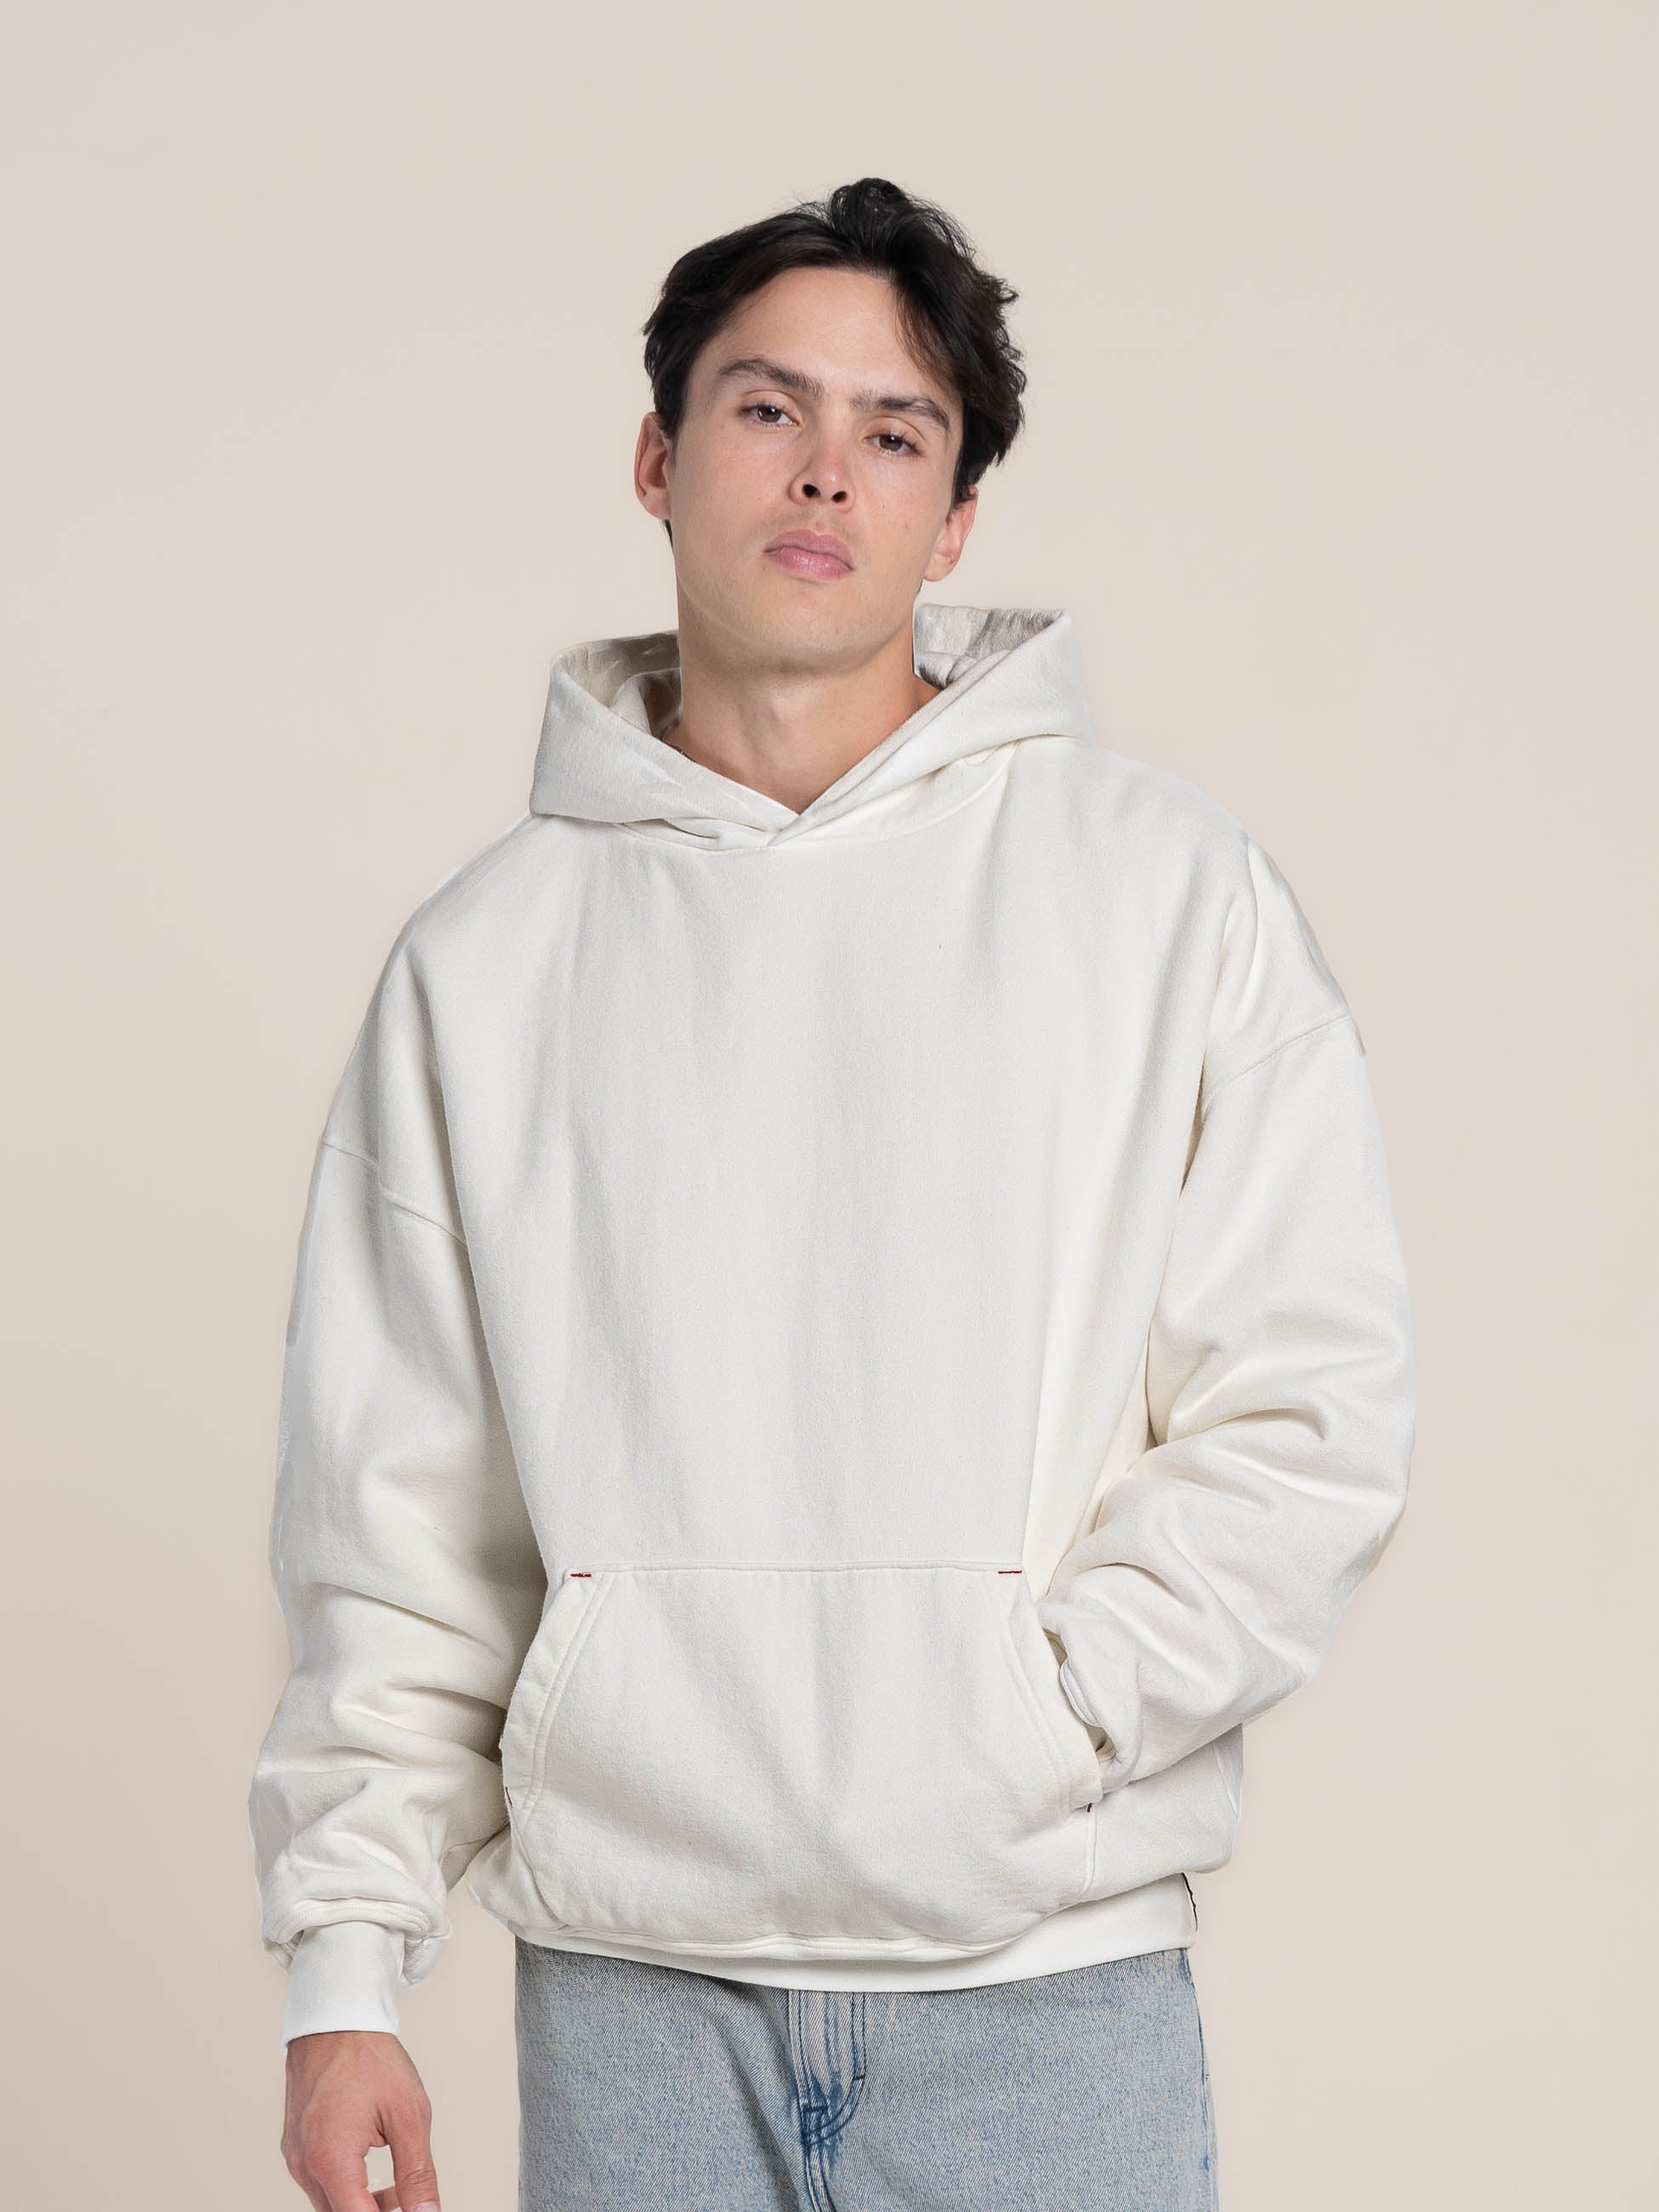 Male Model wears Publik Brand Double Layered Hoodie Acoustic White Heavyweight Fleece, all made in USA